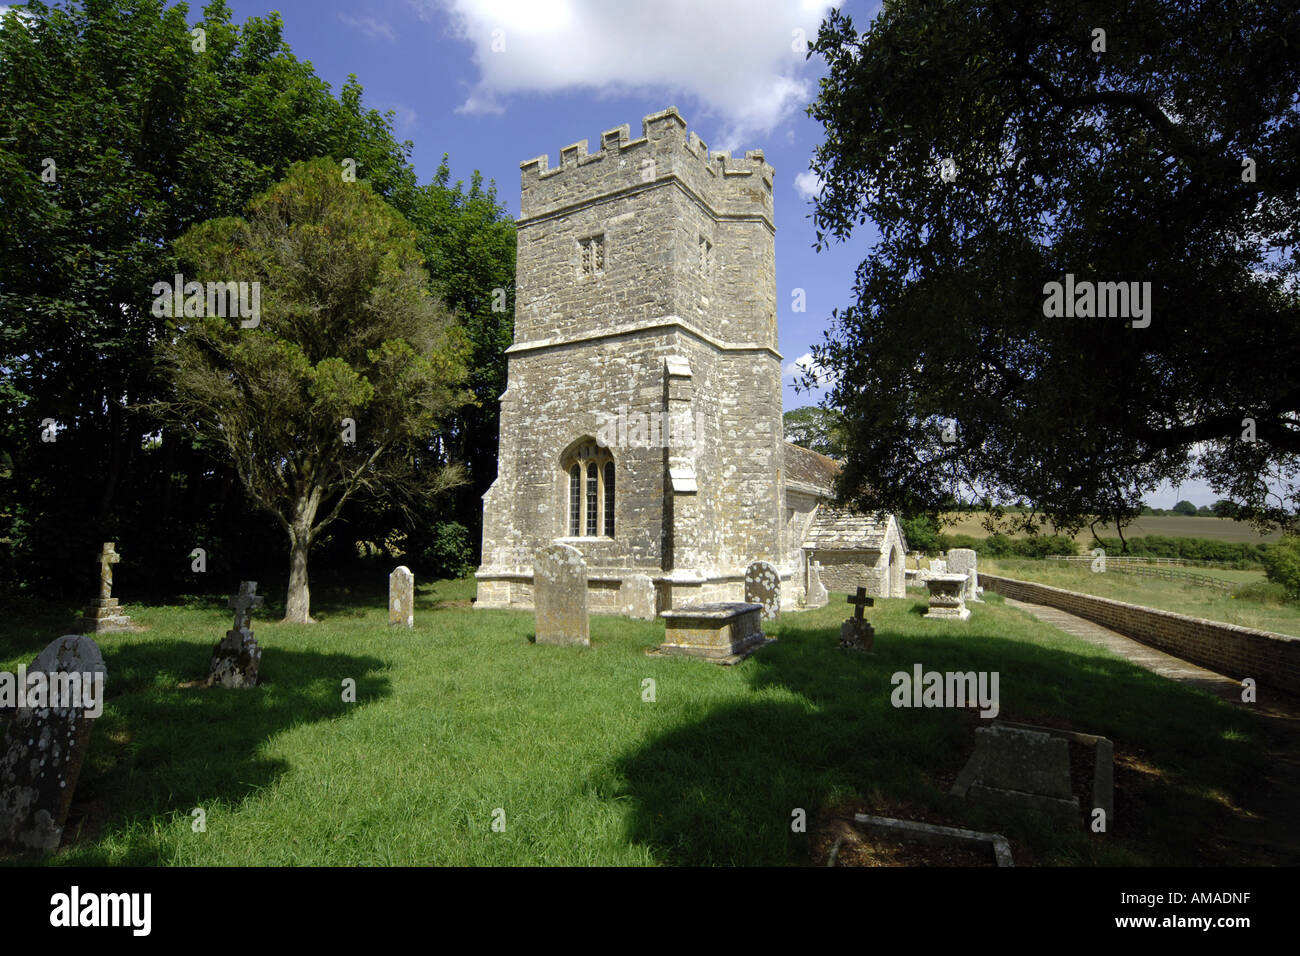 Medieval Church in Rural England at Whitcombe, Dorset. Stock Photo